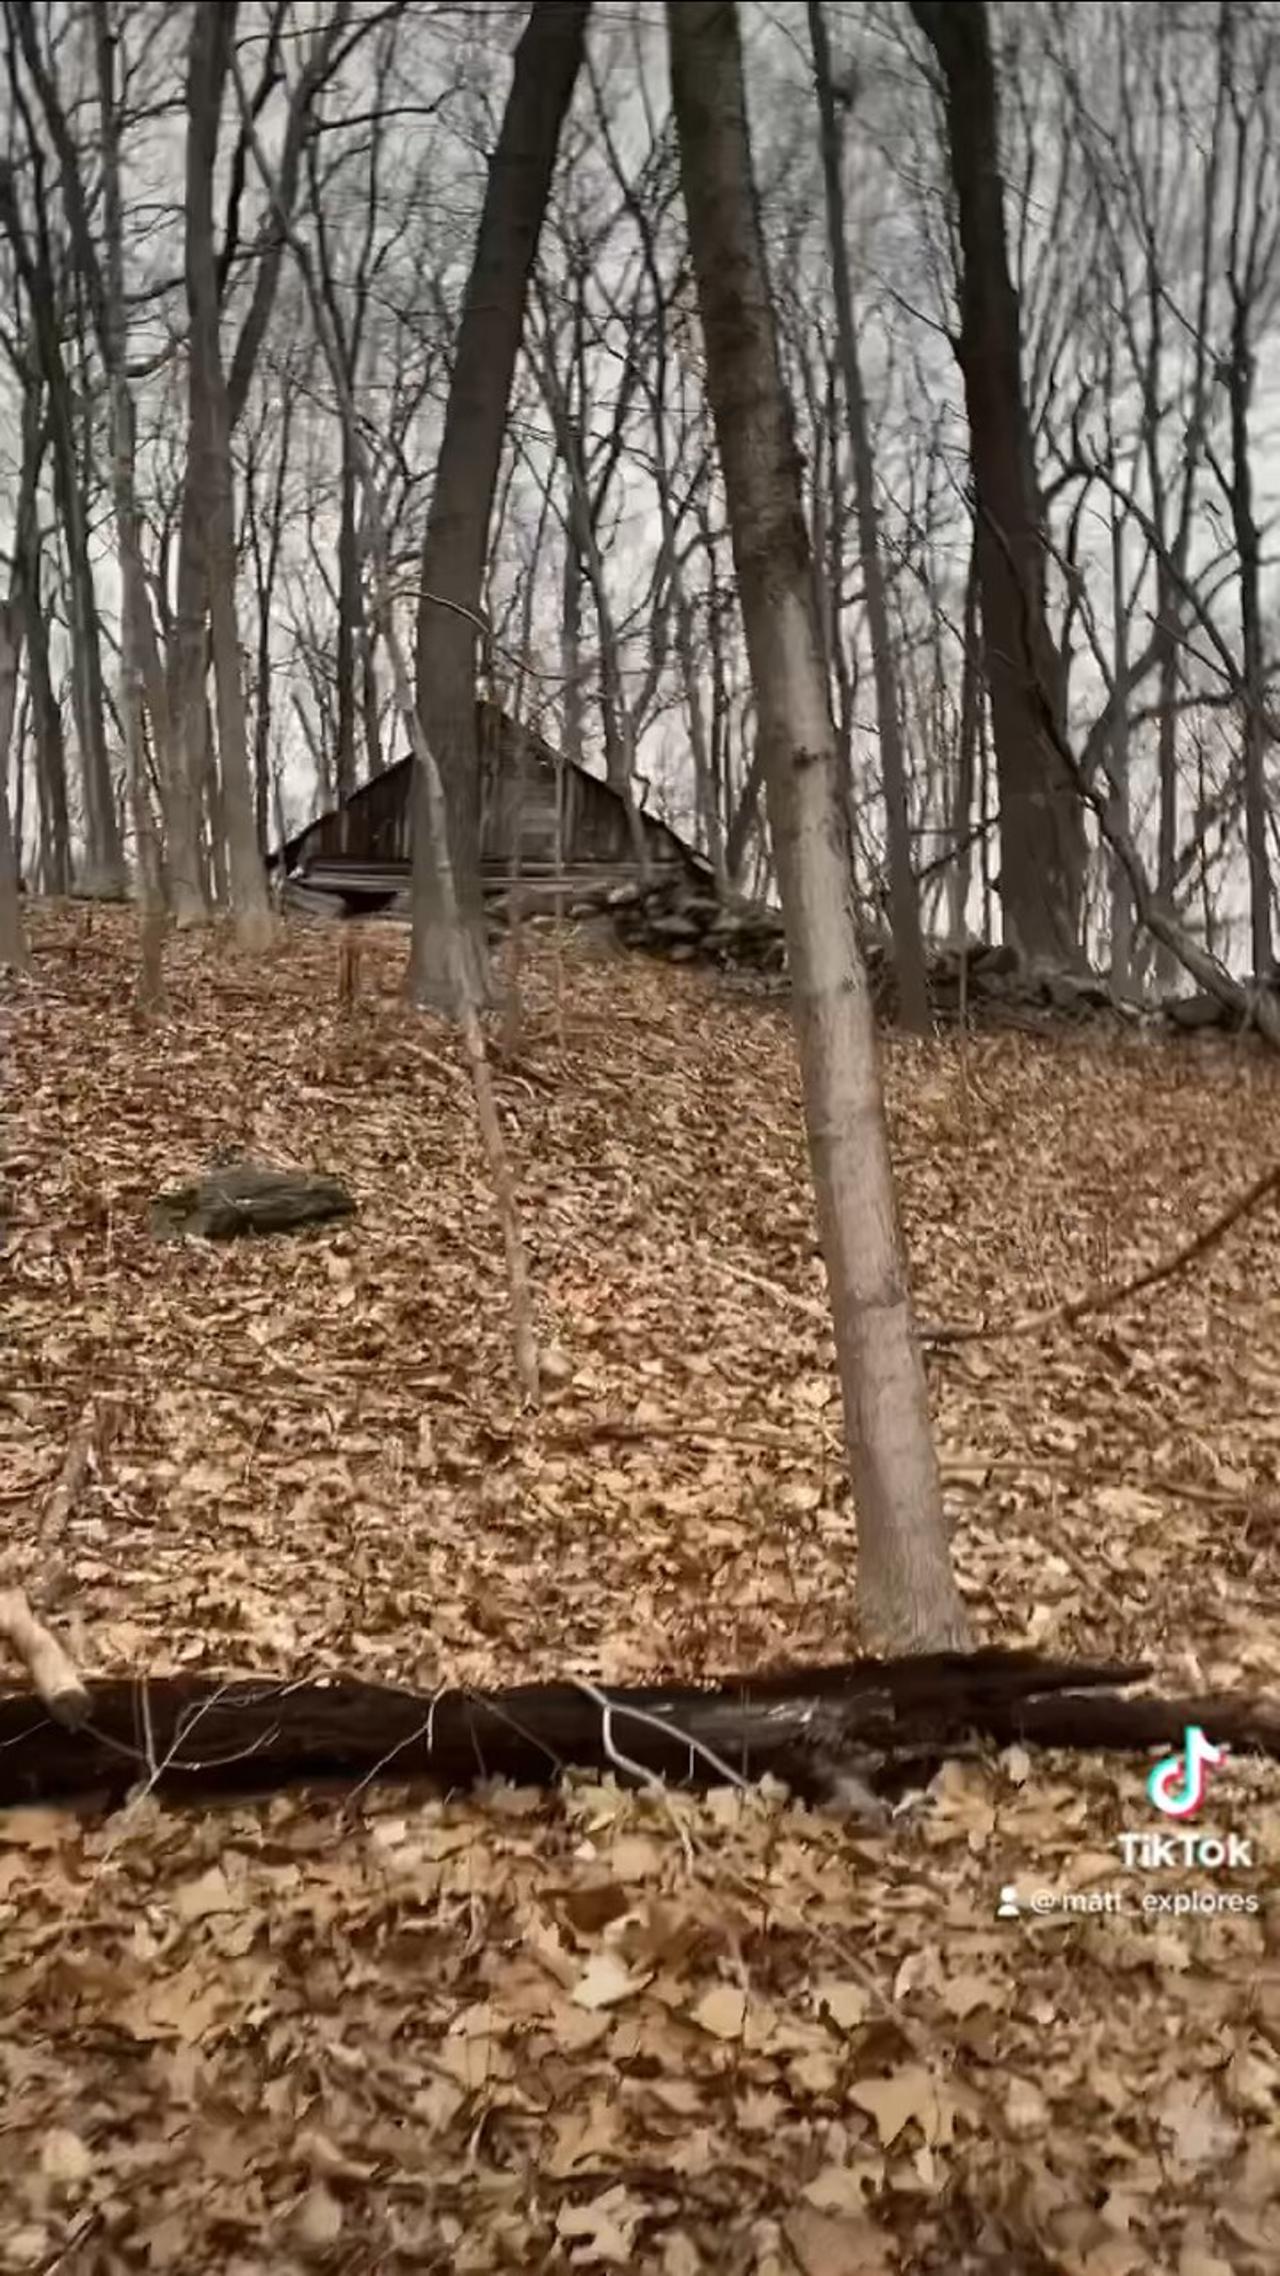 Creepy Blair witch house discovered in the woods